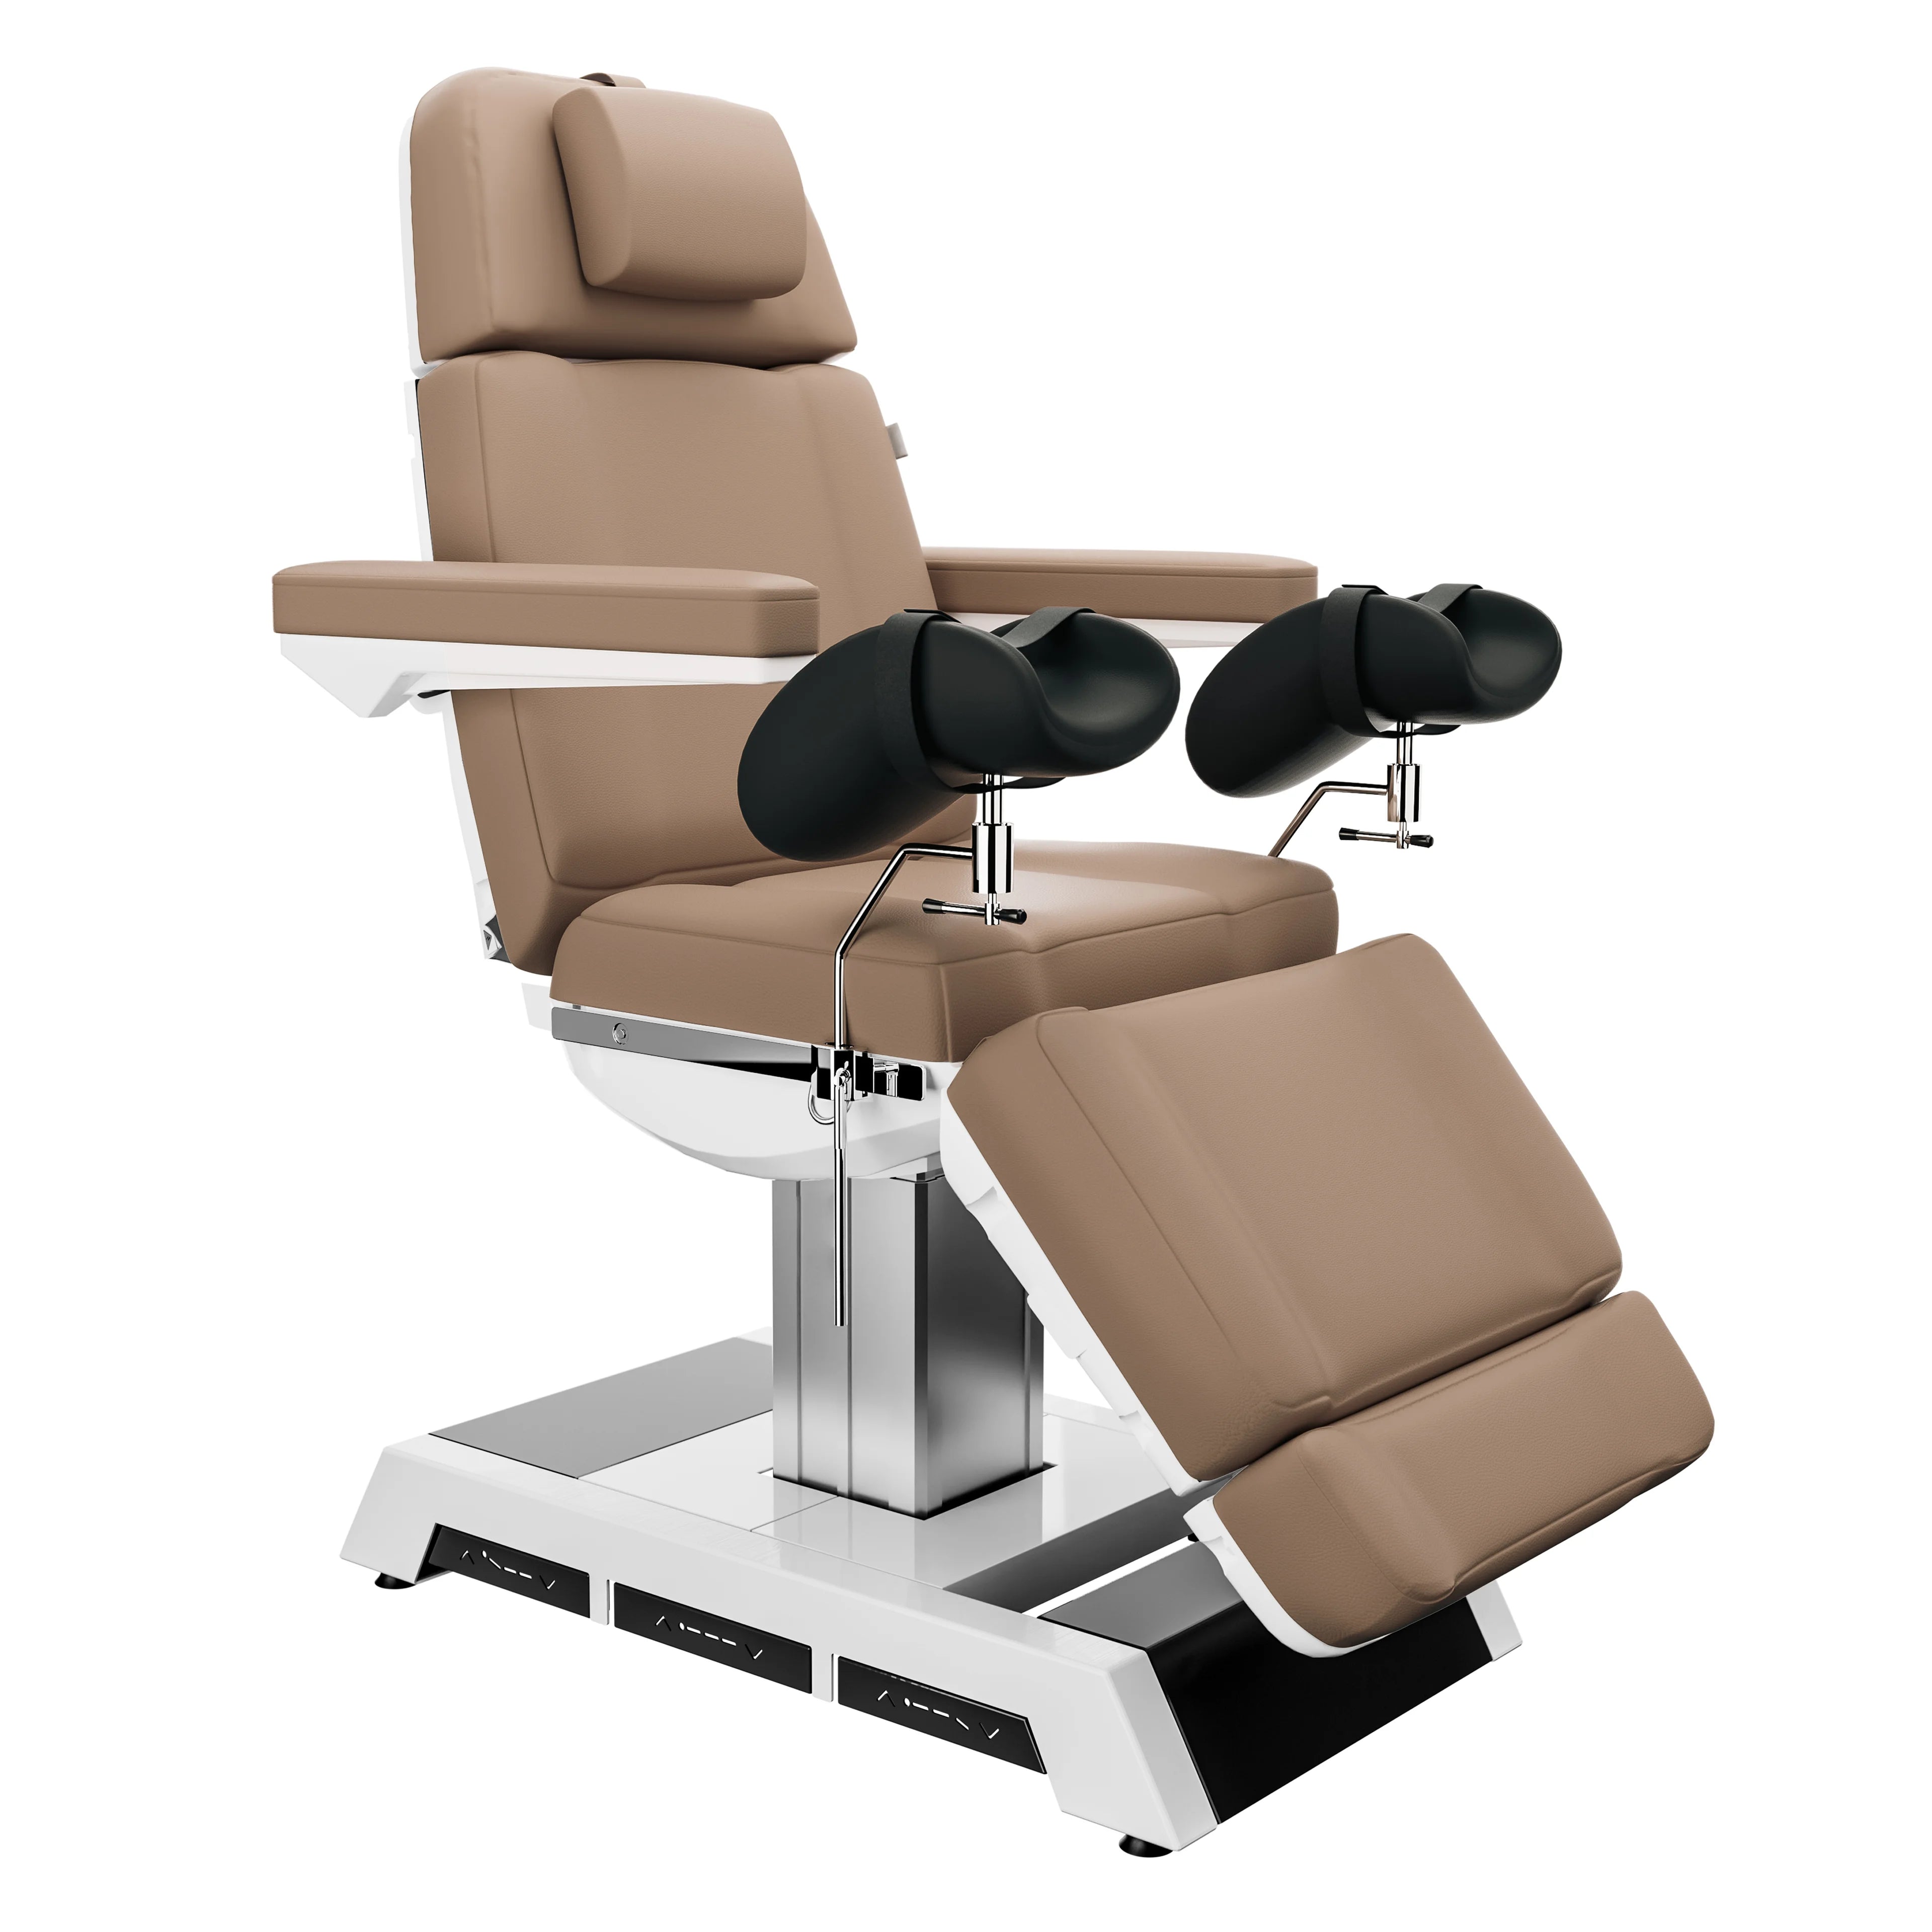 SPAMARC . Adones (Brown) . OBGYN & GYNECOLOGY . STIRRUPS . 4 MOTOR SPA TREATMENT CHAIR/BED